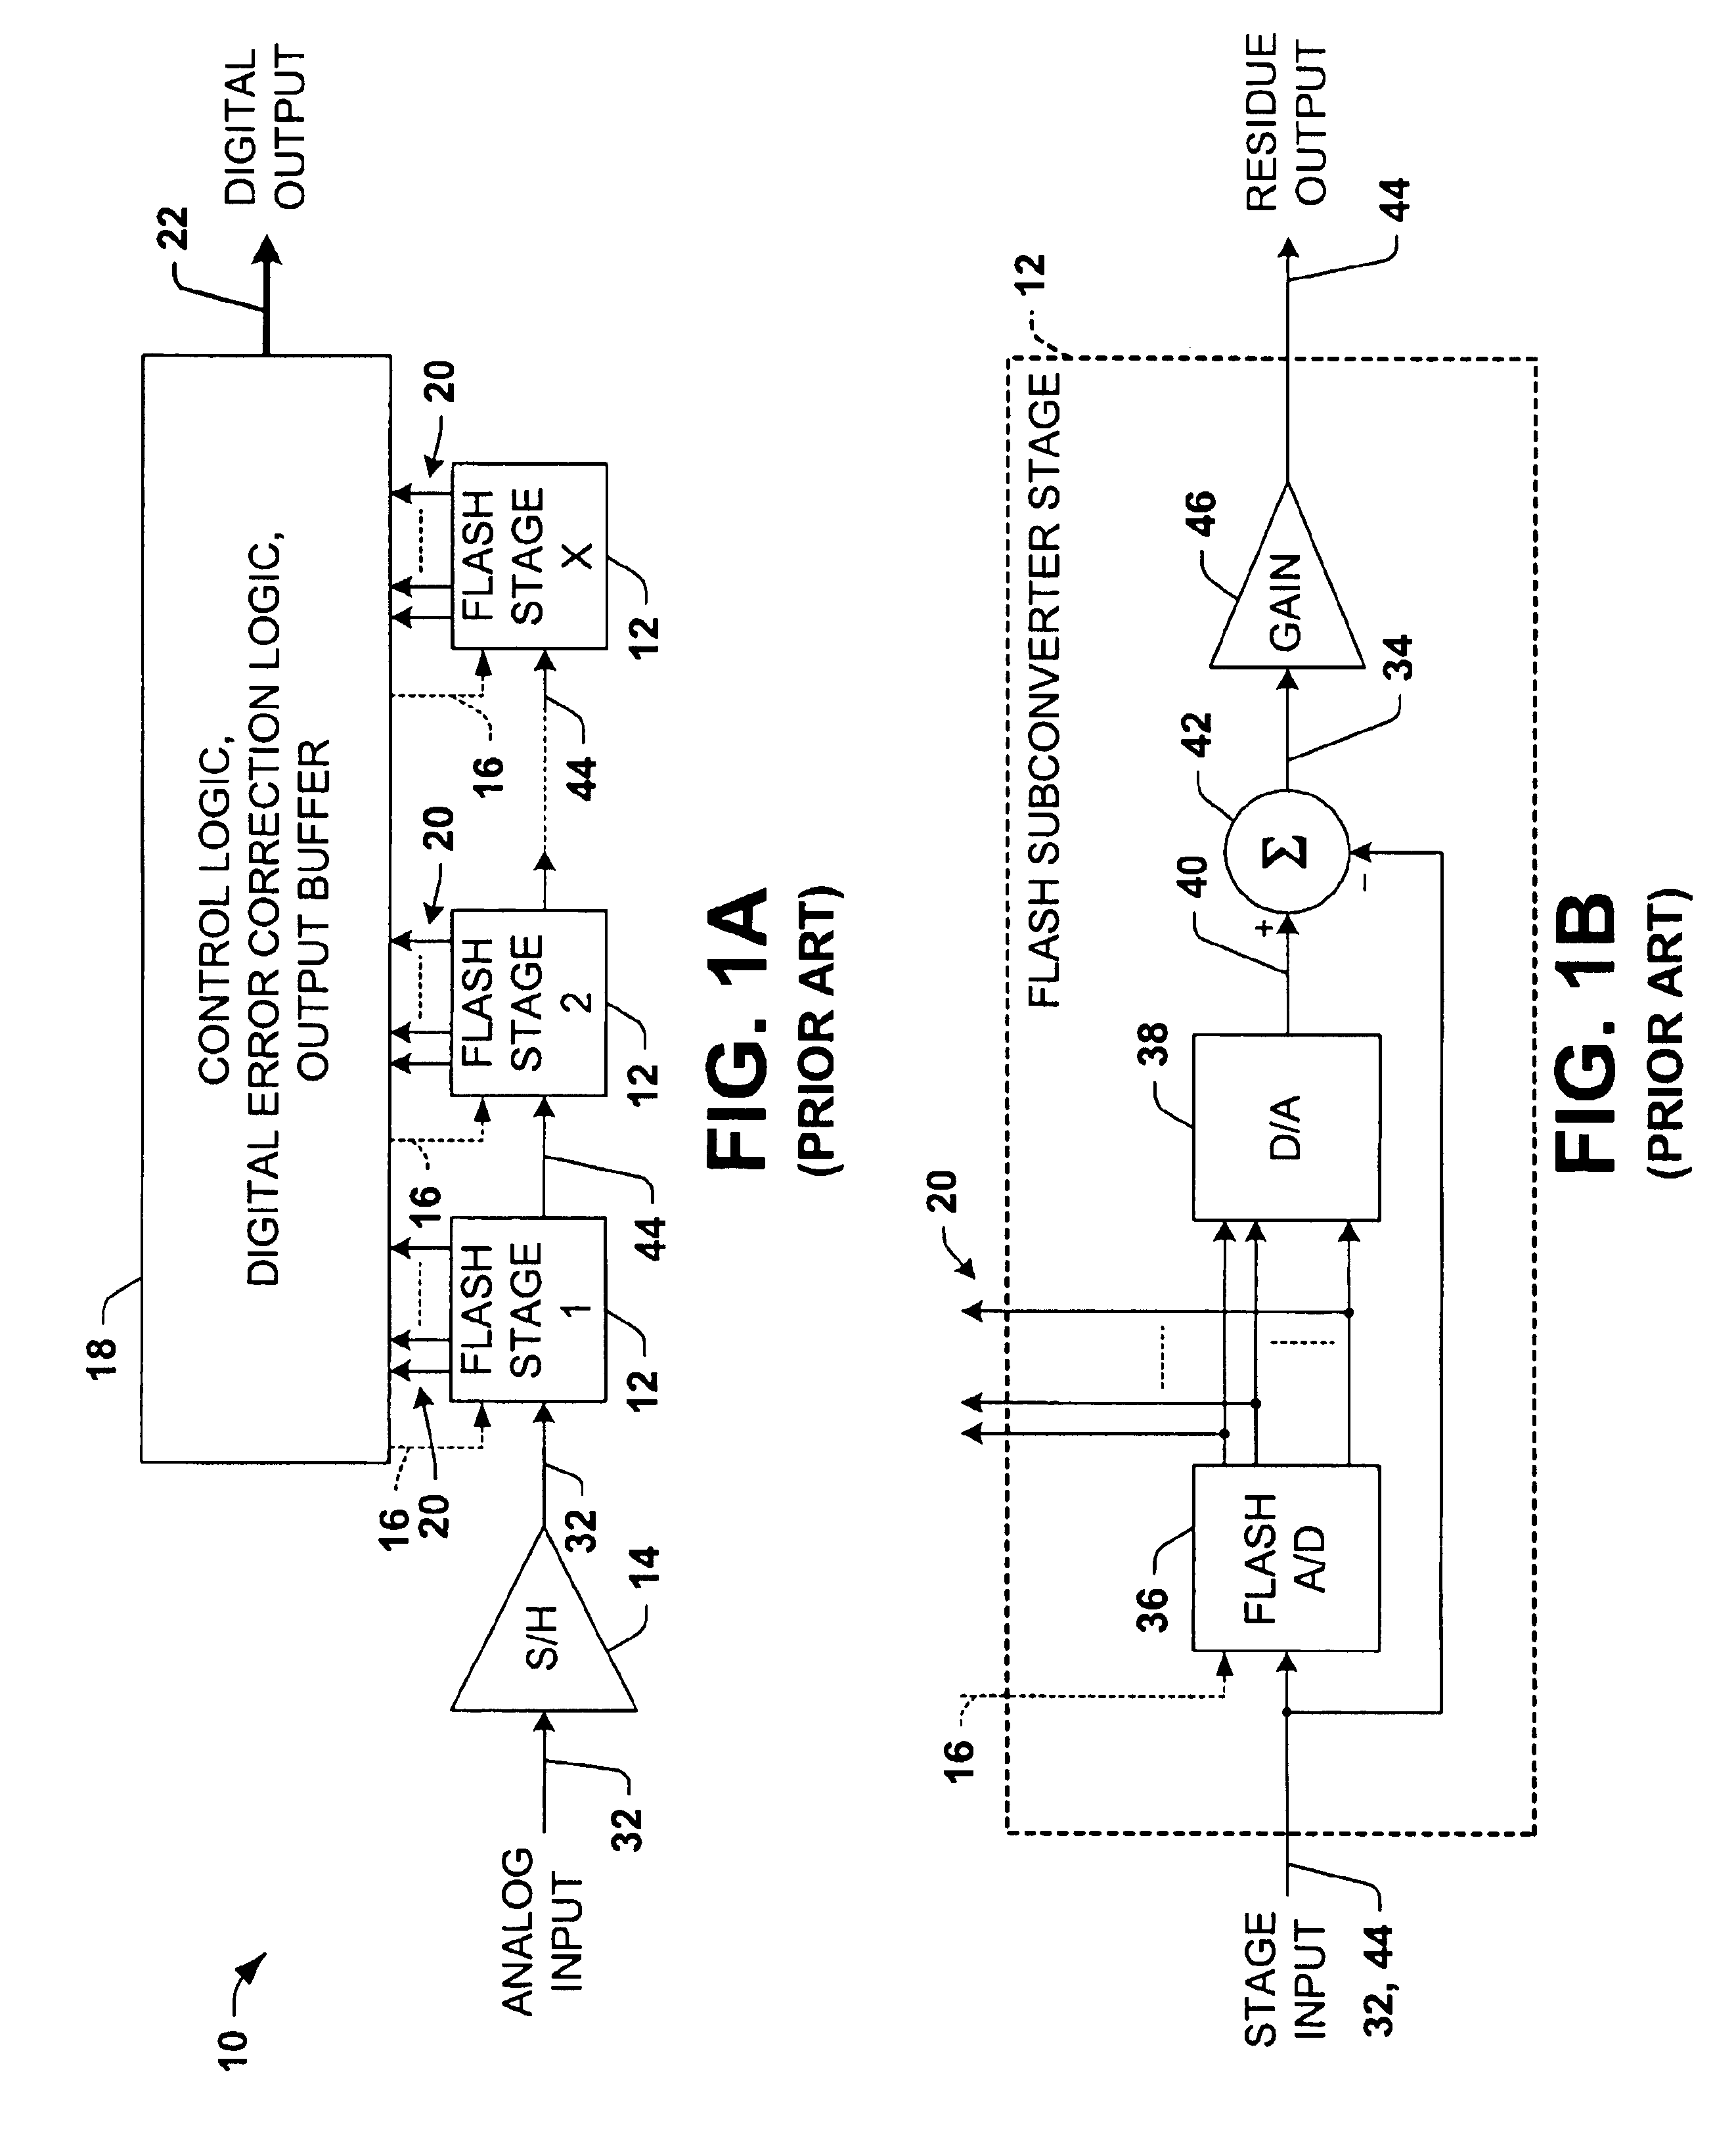 Differential pipelined analog to digital converter with successive approximation register subconverter stages